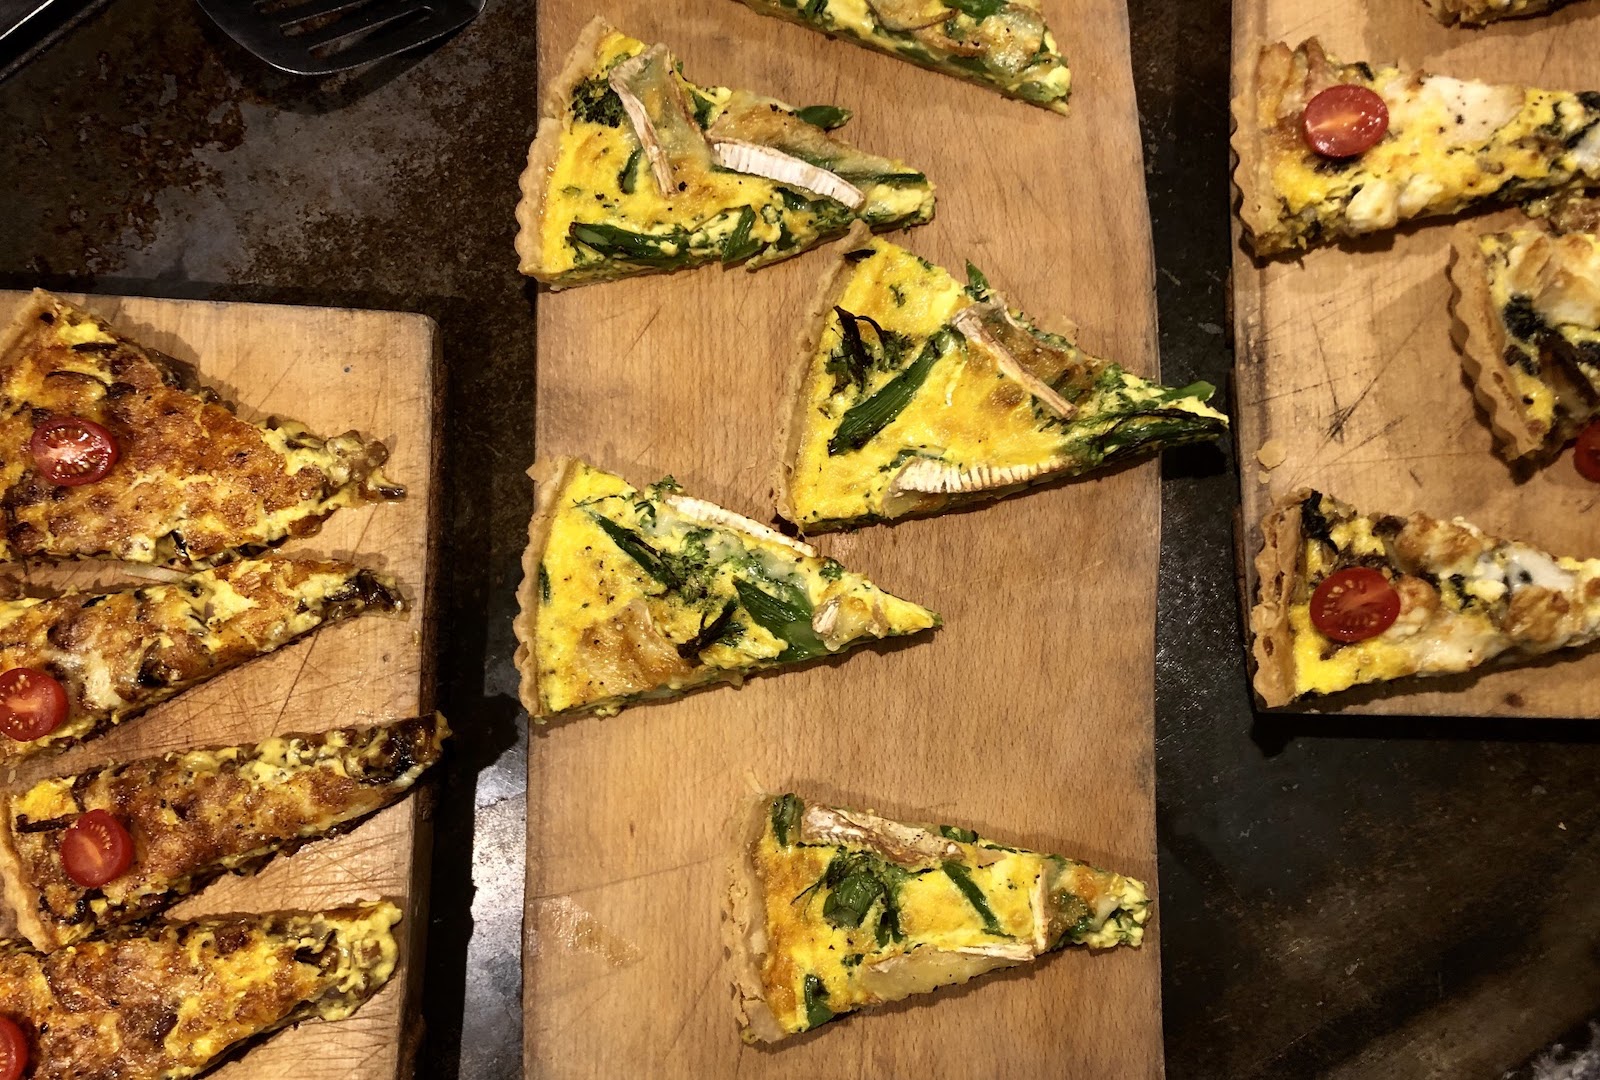 Three types of quiche laying on serving platters.